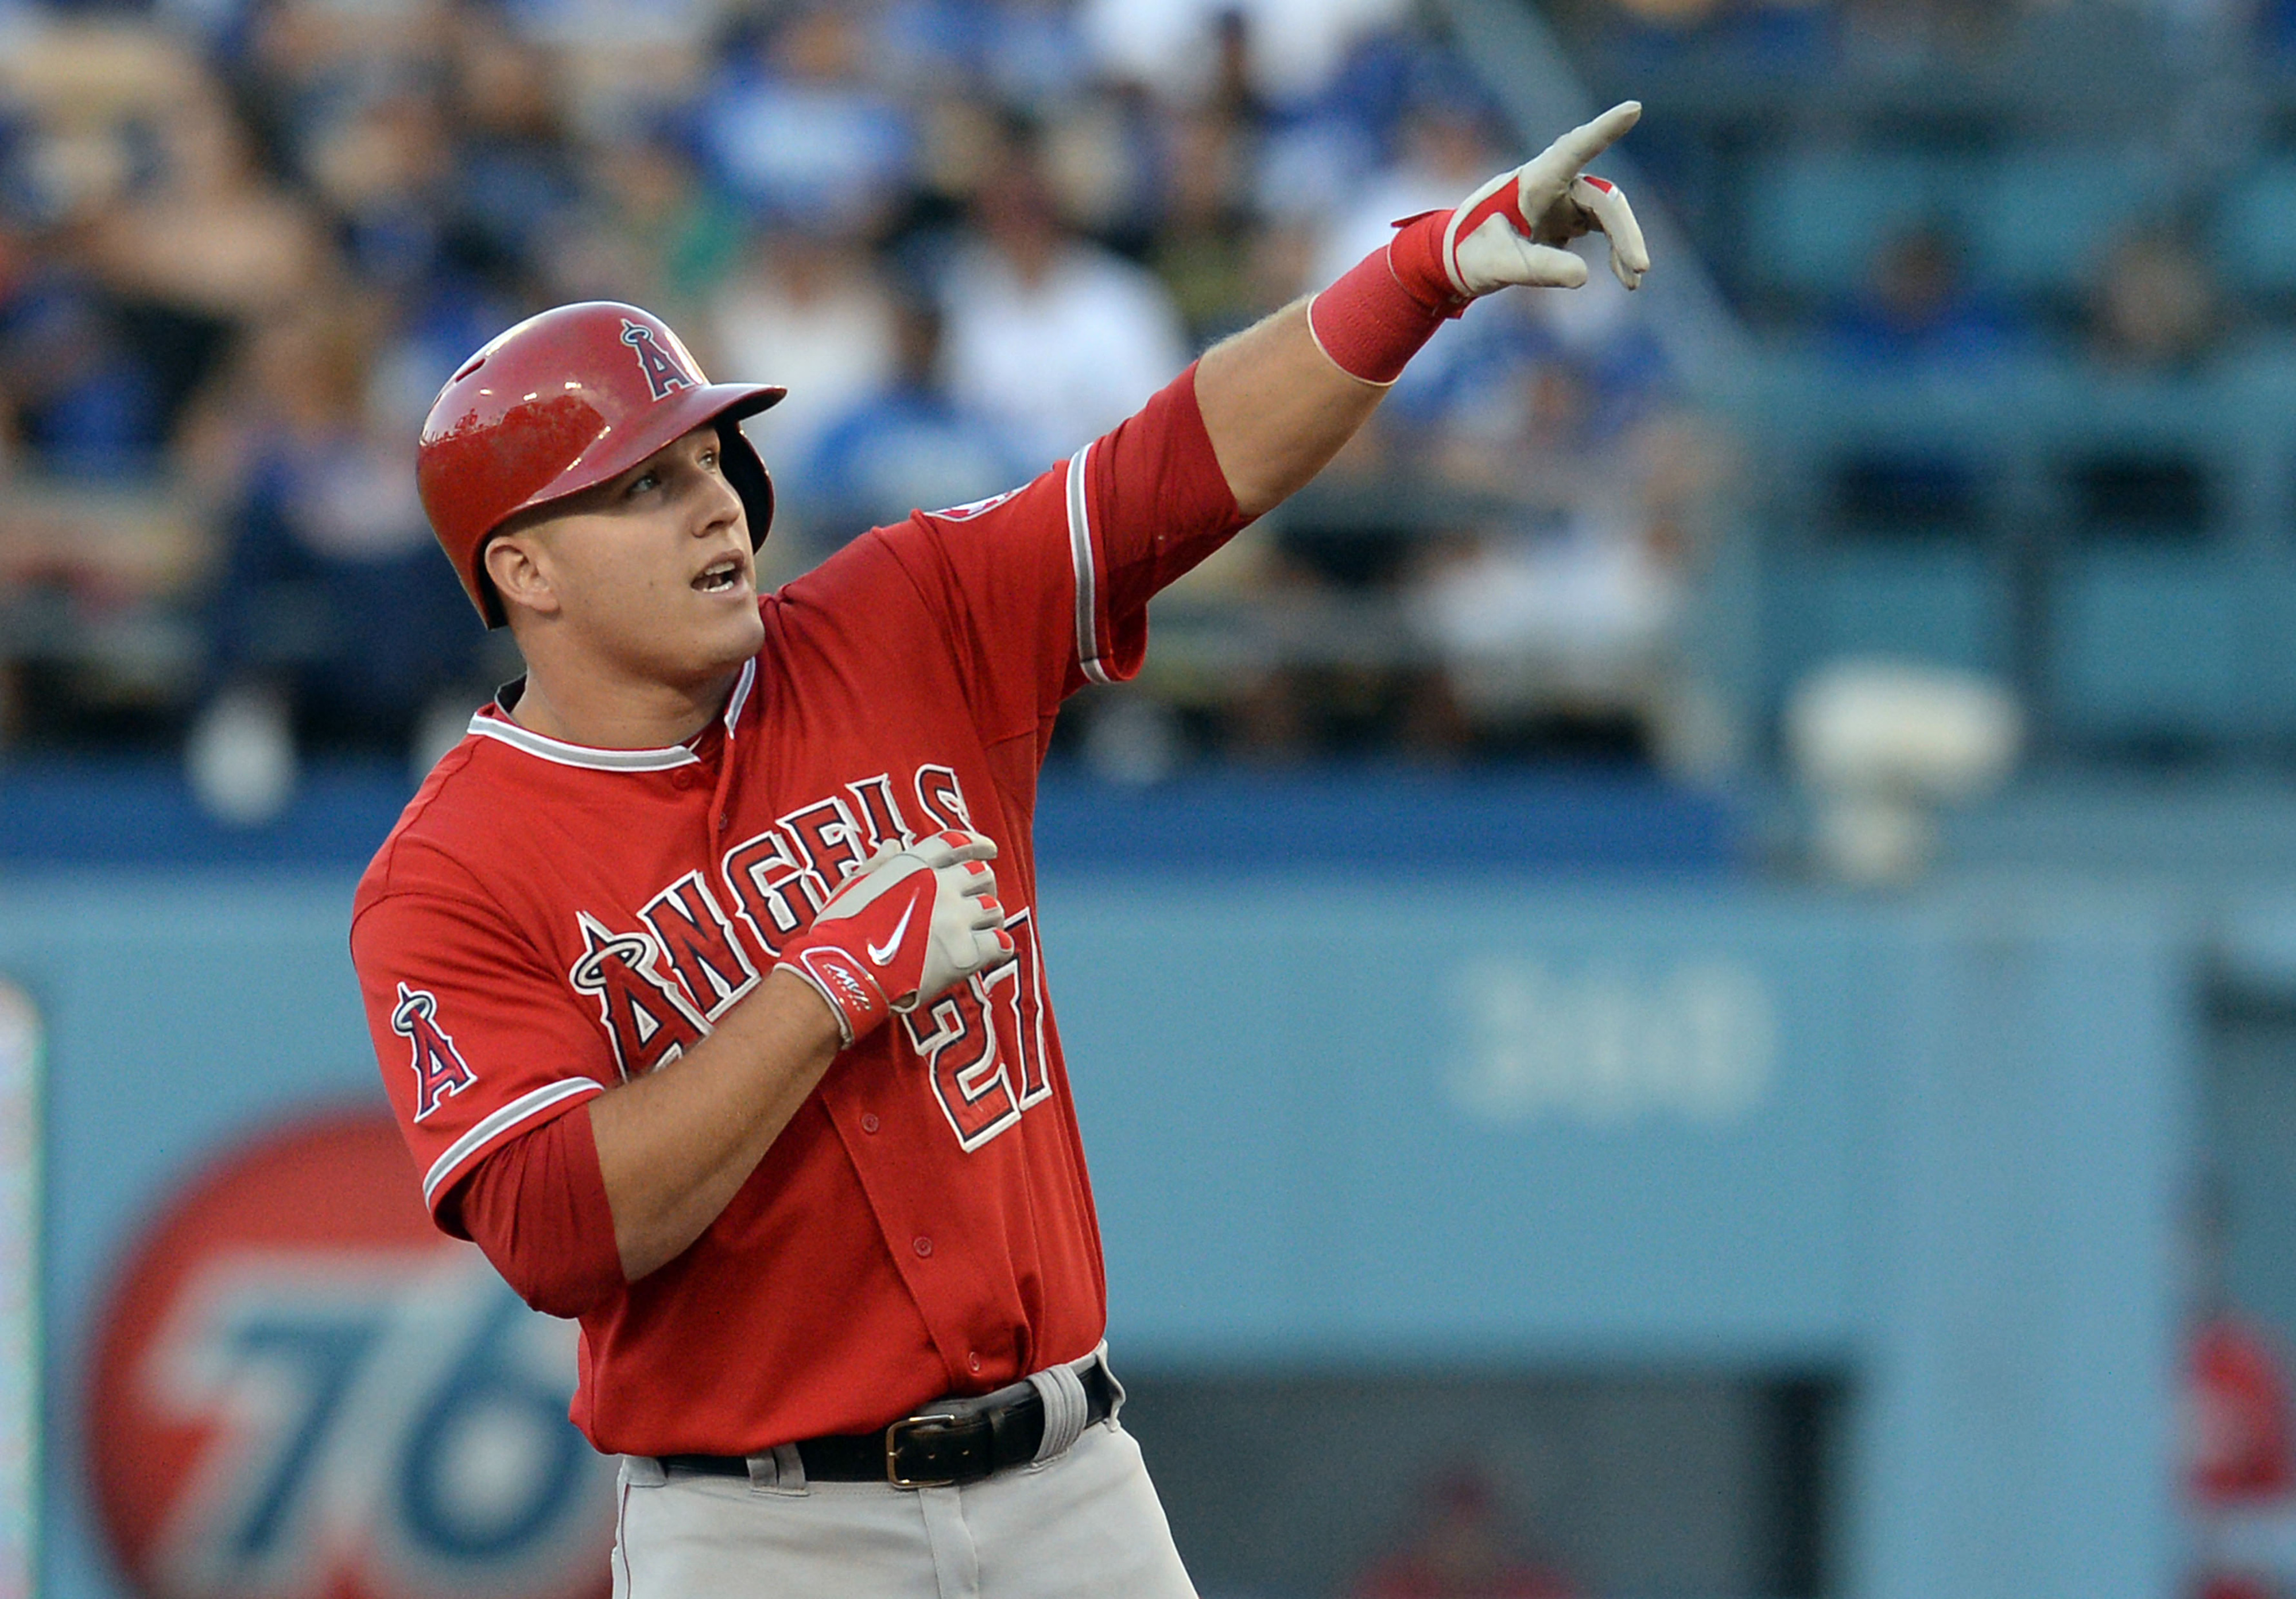 Is it a good idea for the Yankees to trade for Mike Trout?